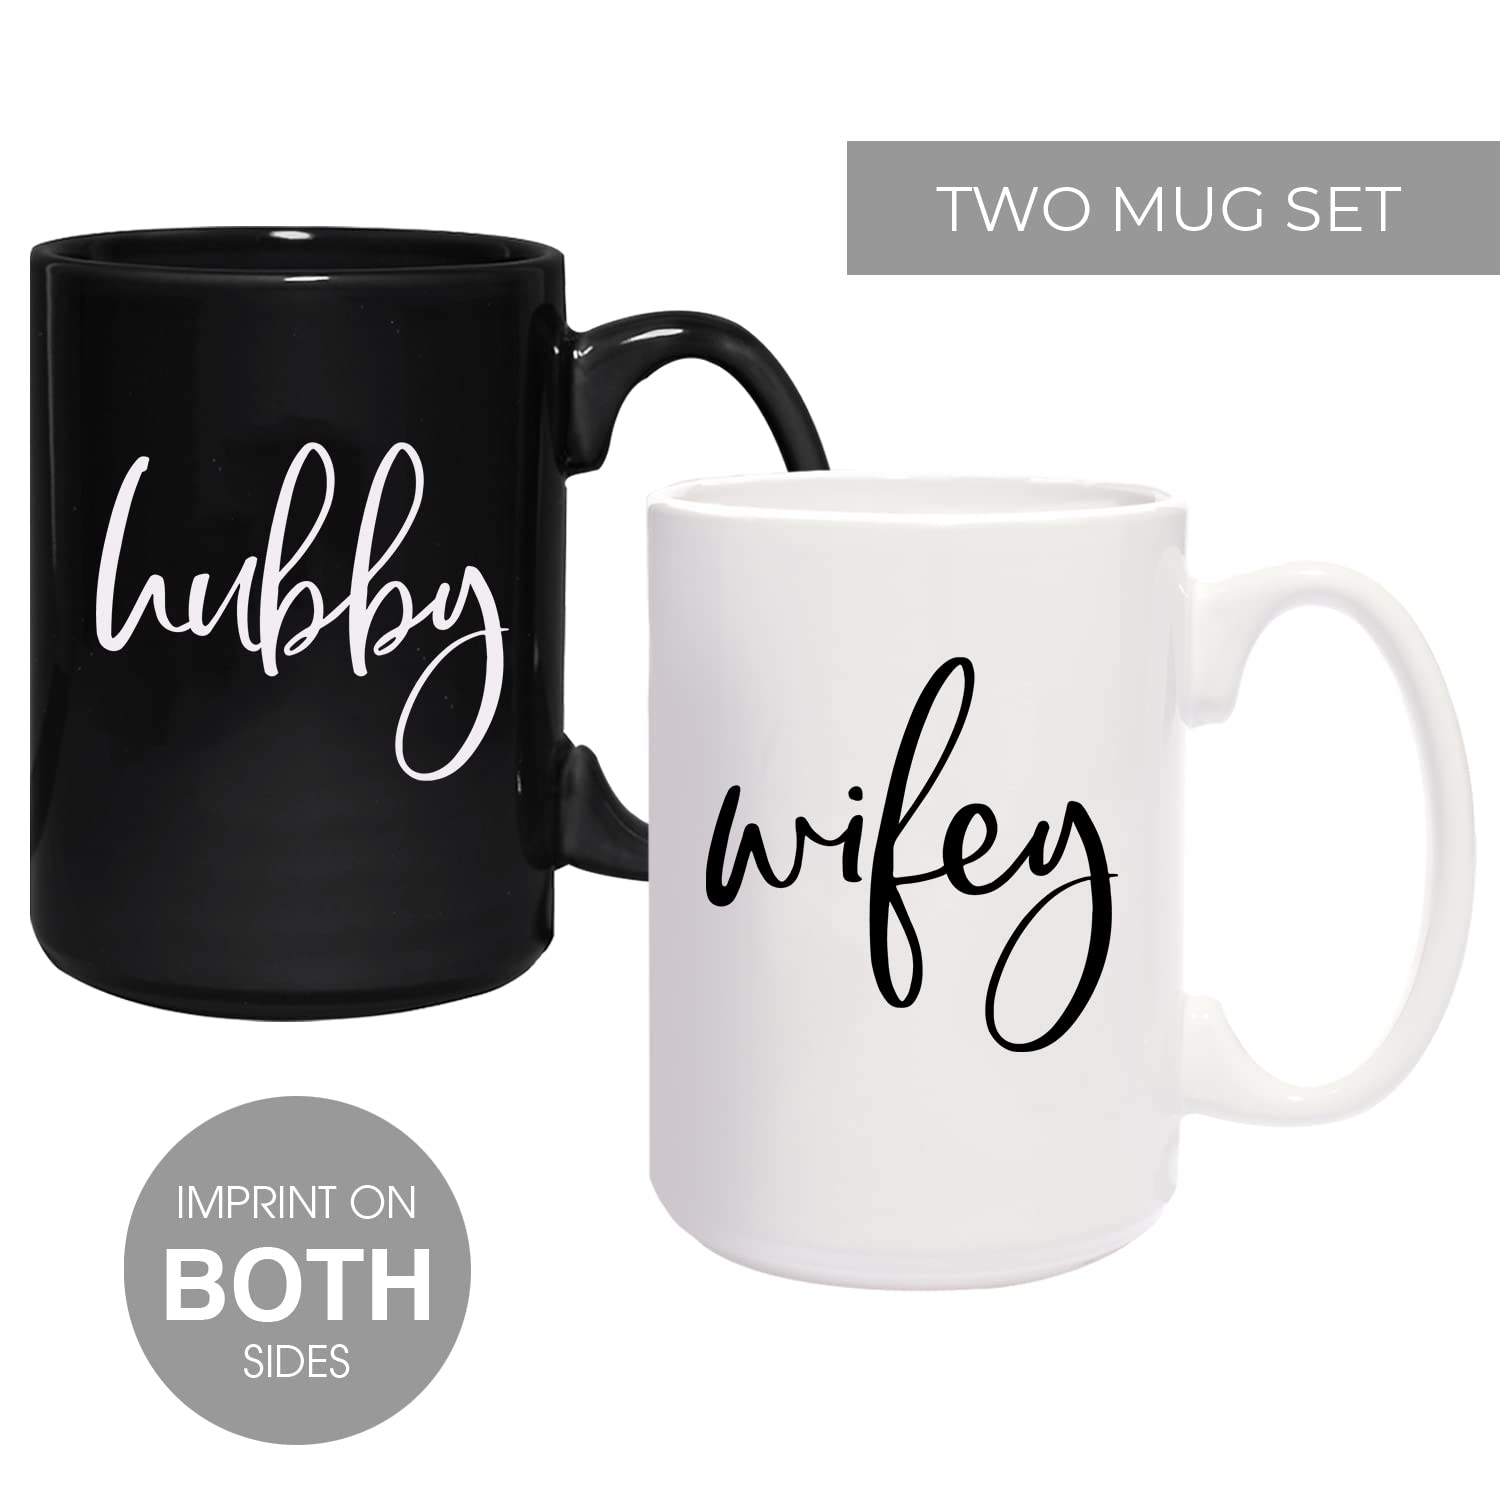 Canopy Street Wifey And Hubby Matching Mugs/Two Jumbo 15 Ounce White And Black Ceramic Mugs/Funny Husband And Wife Coffee Cup Set/Black And White Wedding Present Mug Set.